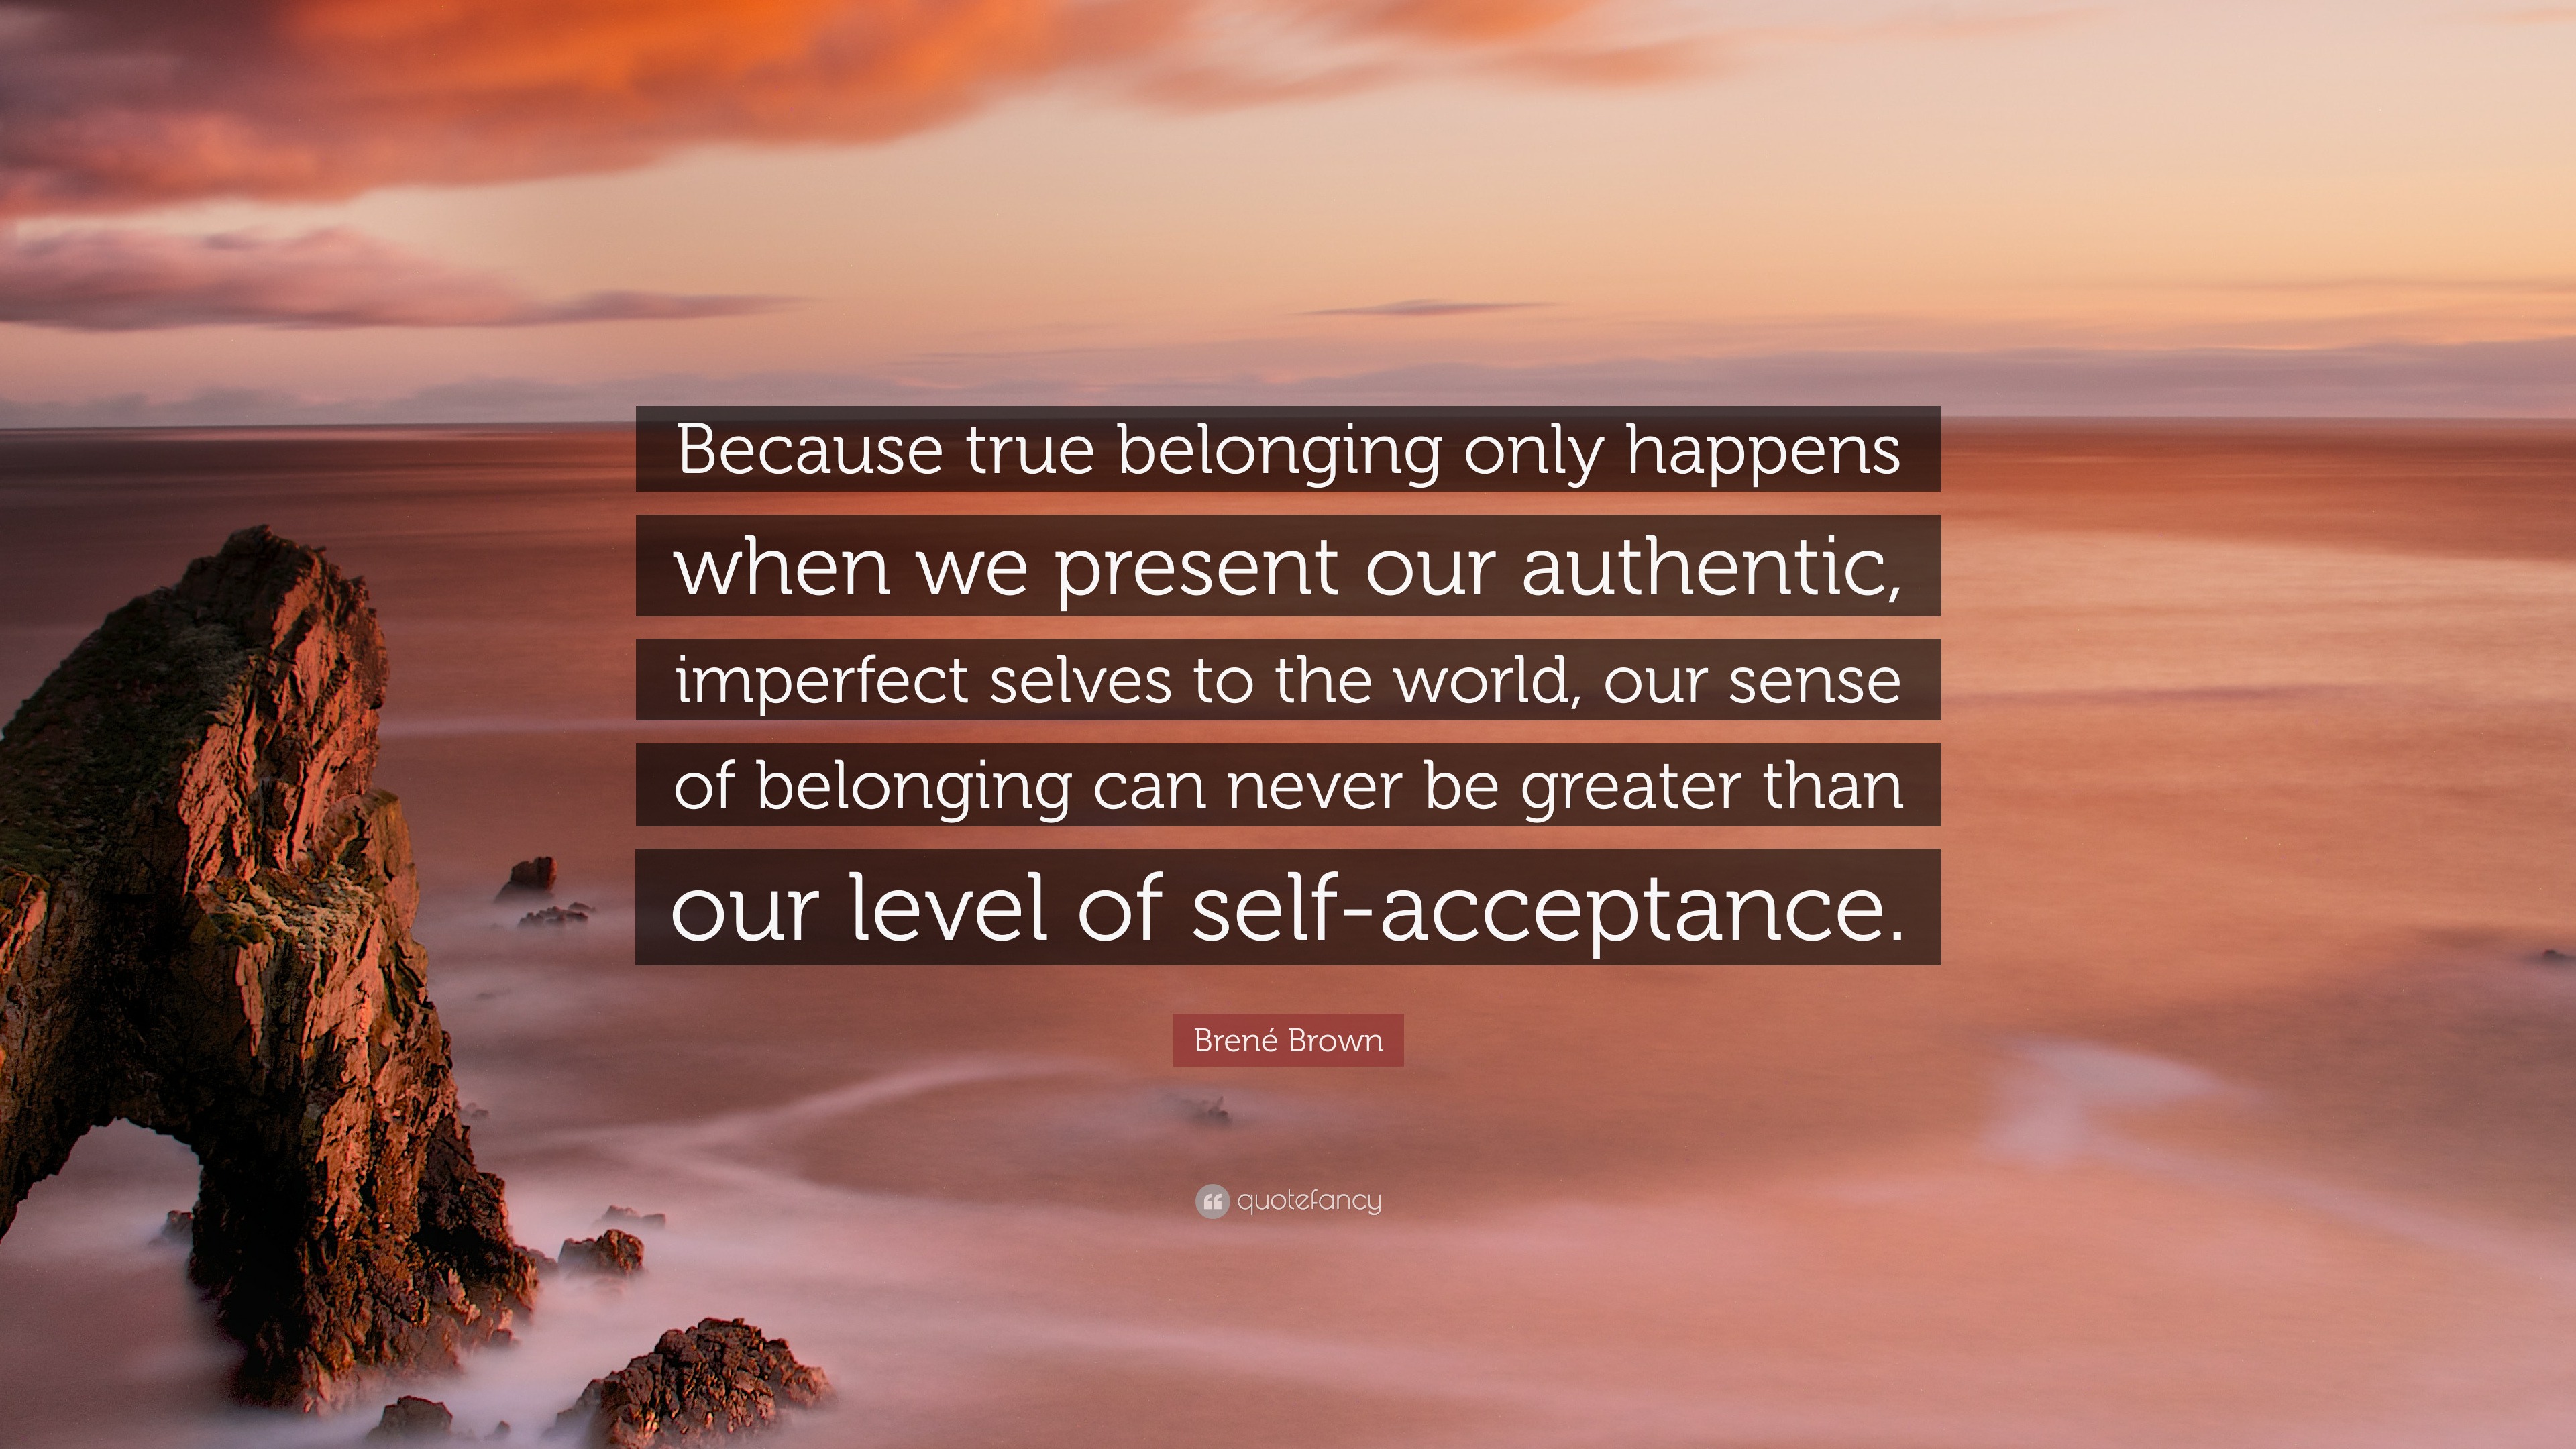 Brené Brown Quote: “Because true belonging only happens when we present